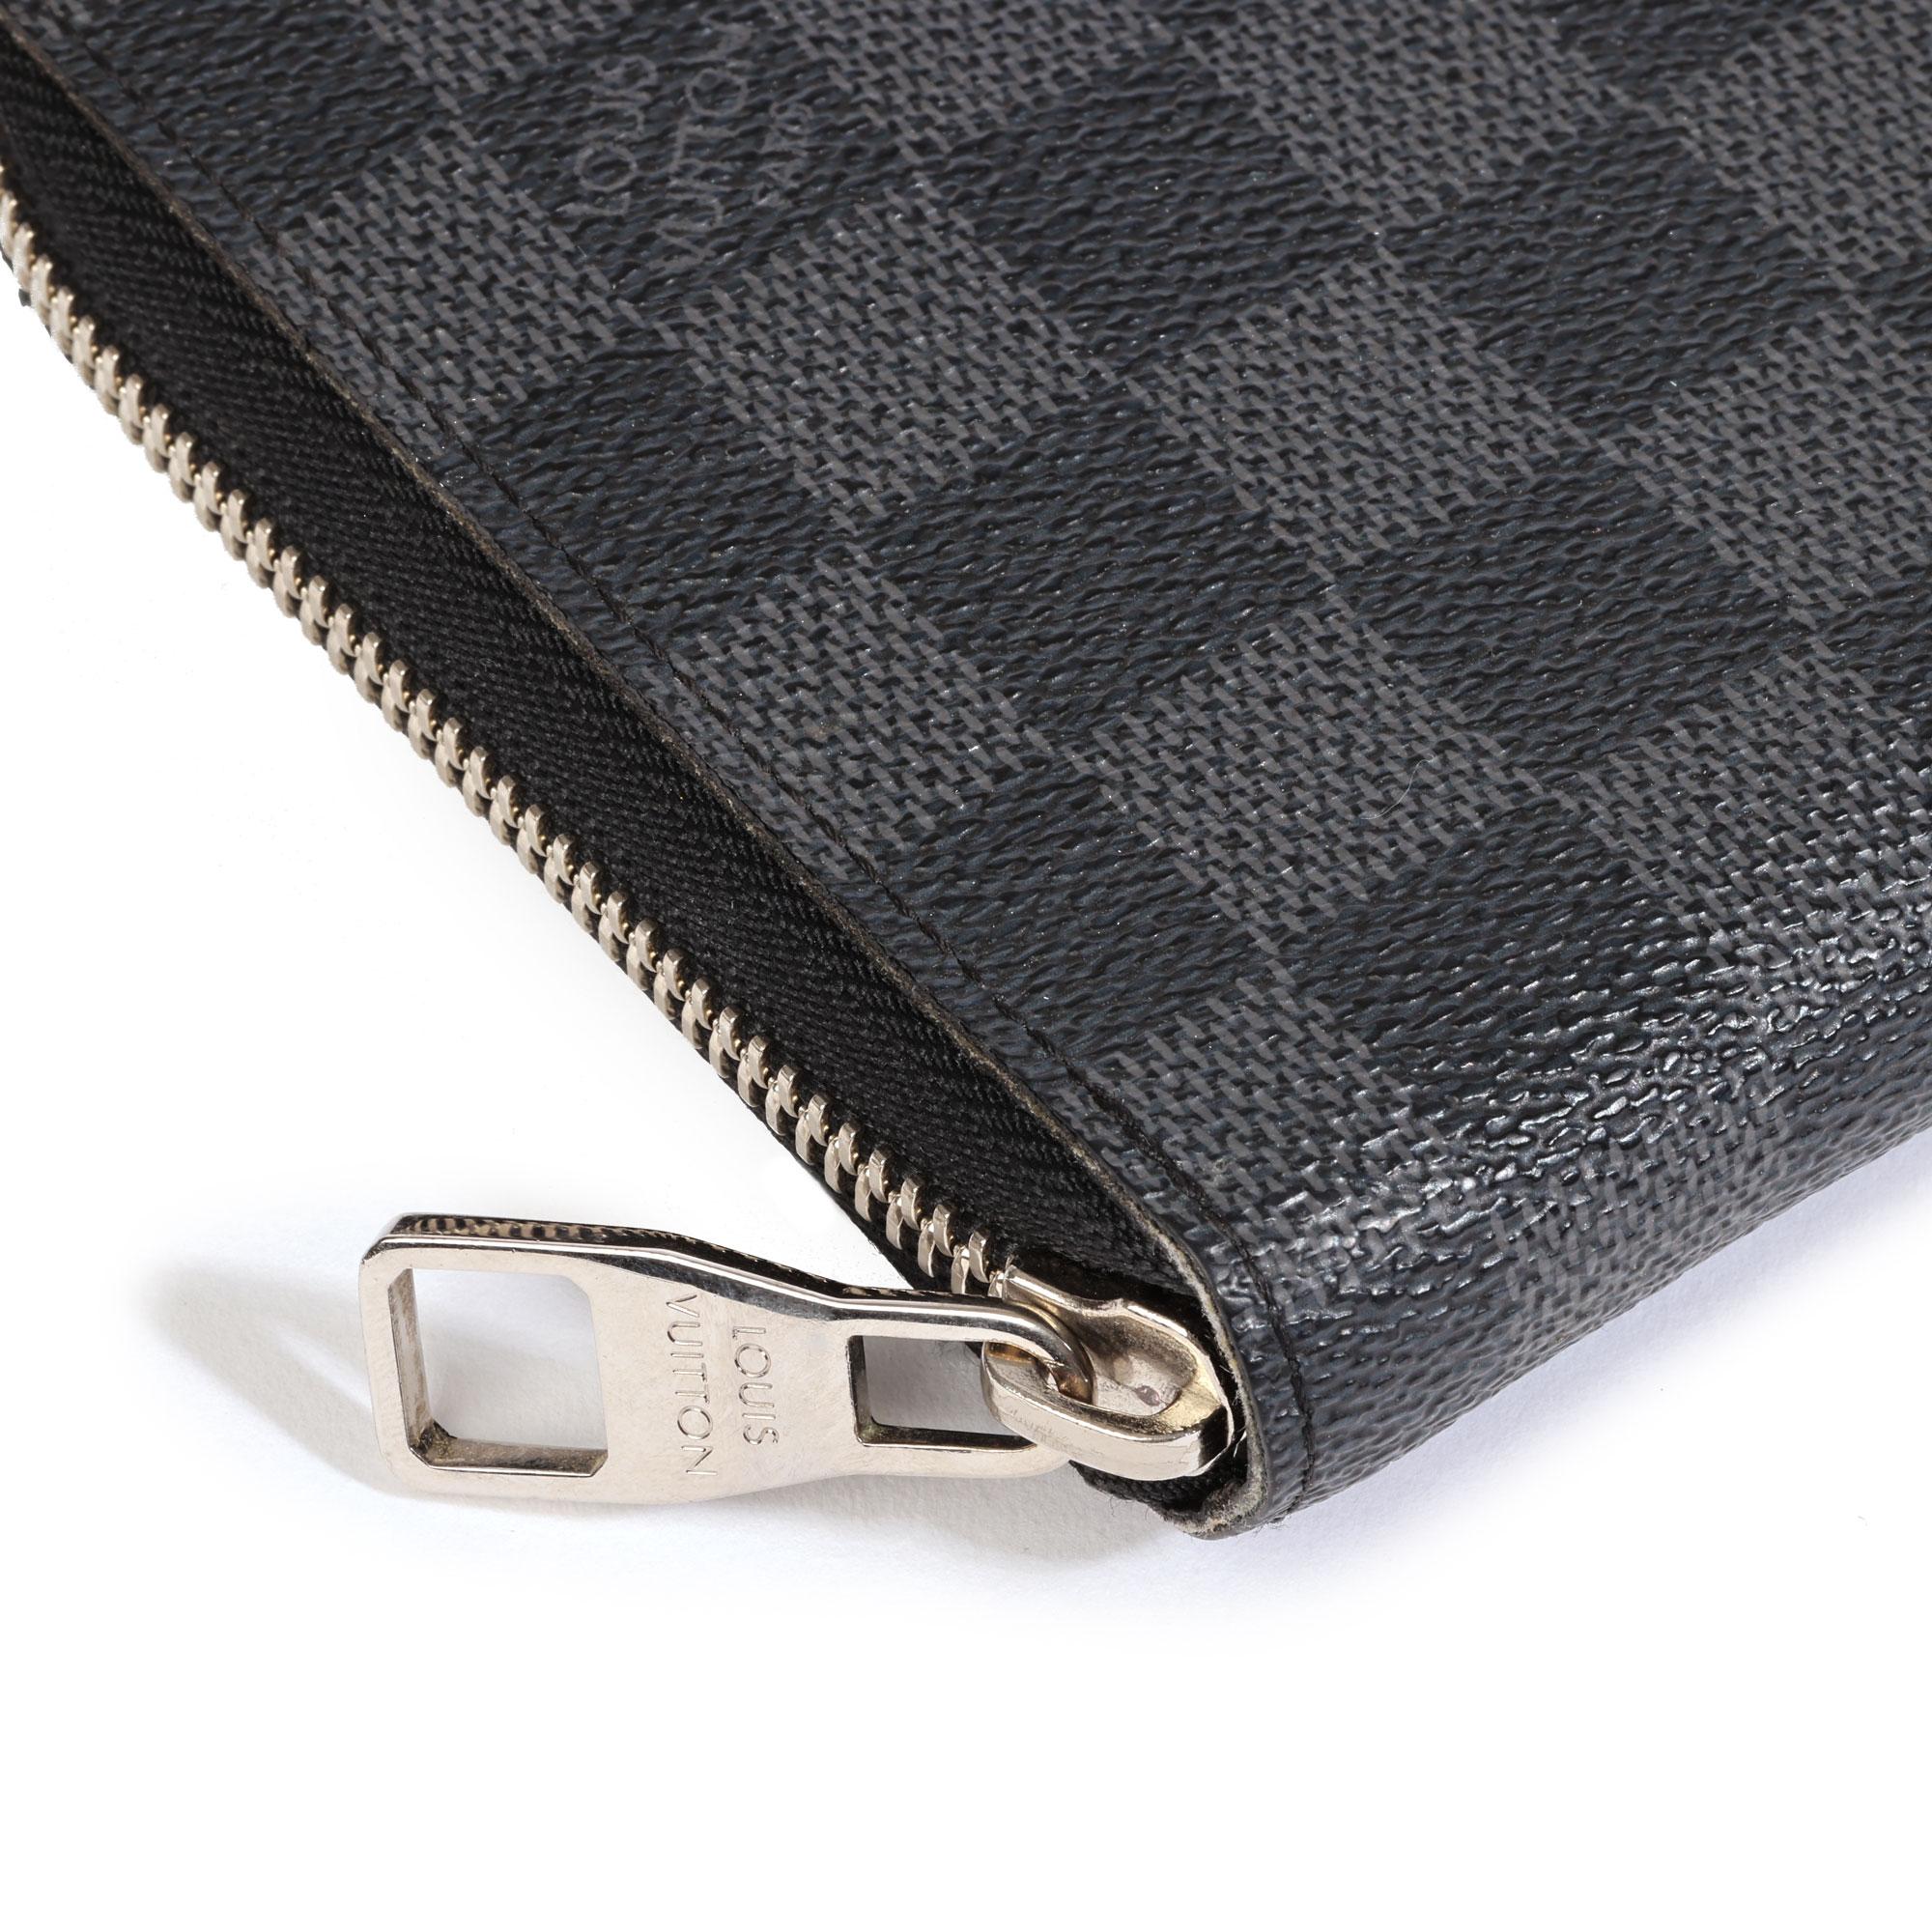 Louis Vuitton GRAPHITE DAMIER COATED CANVAS ZIPPY ORGANISER

CONDITION NOTES
The exterior is in exceptional condition with minimal signs of use.
The interior is in exceptional condition with minimal signs of use.
The hardware is in exceptional